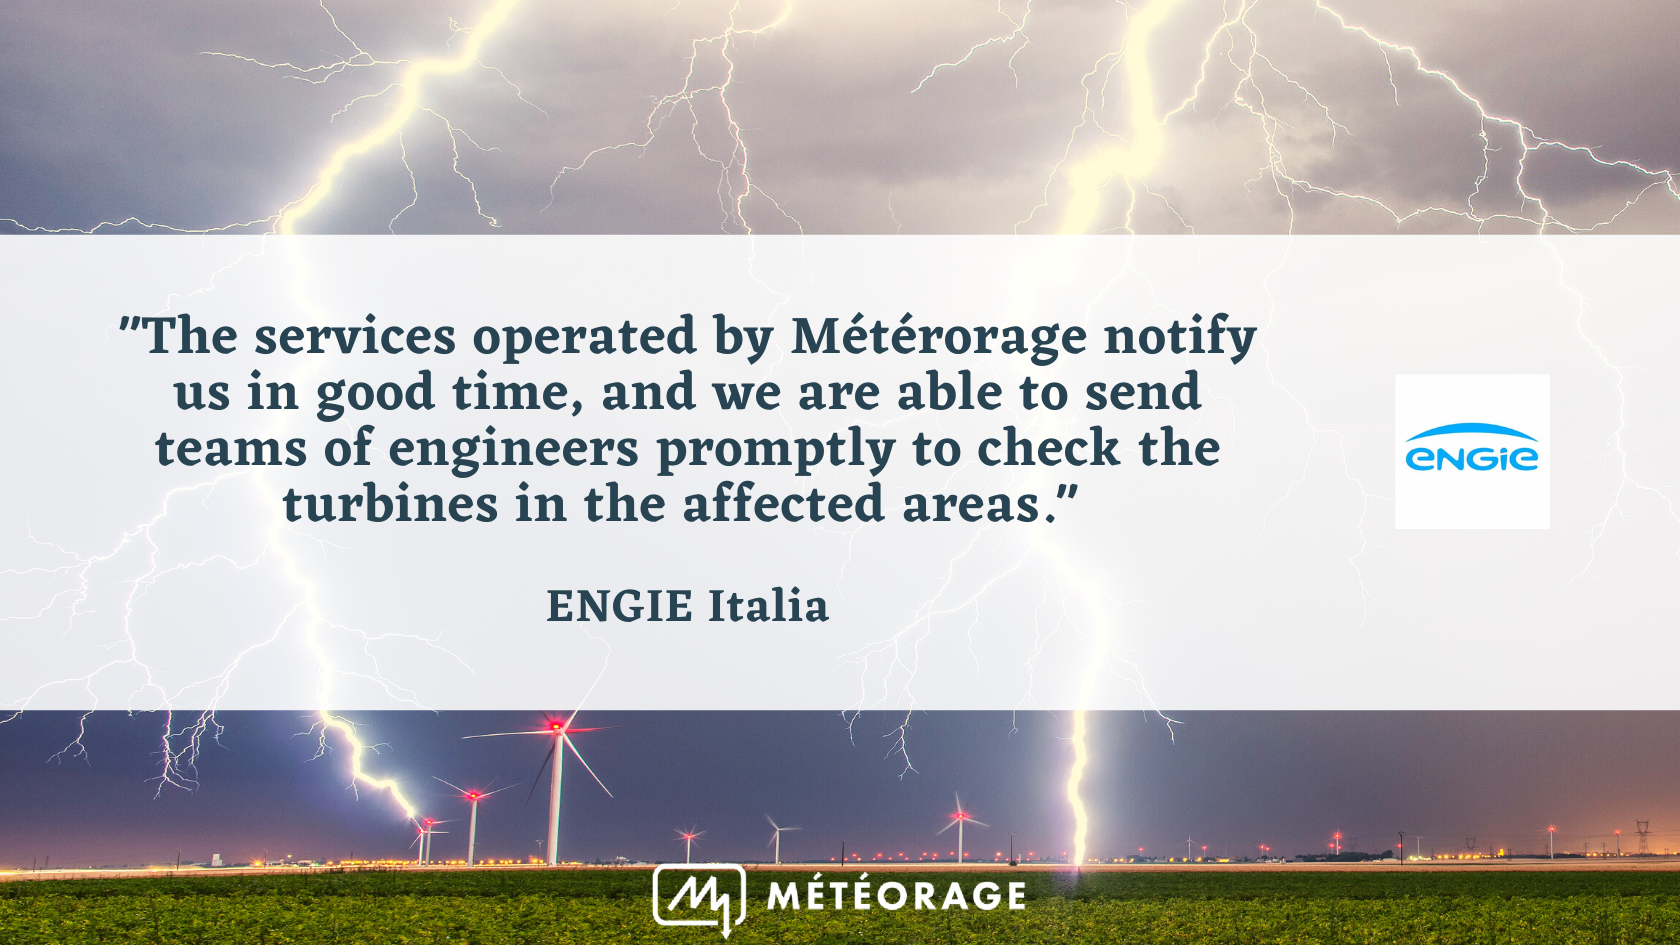 "The services operated by Métérorage notify us in good time, and we are able to send teams of engineers promptly to check the turbines in the affected areas", ENGIE Italia